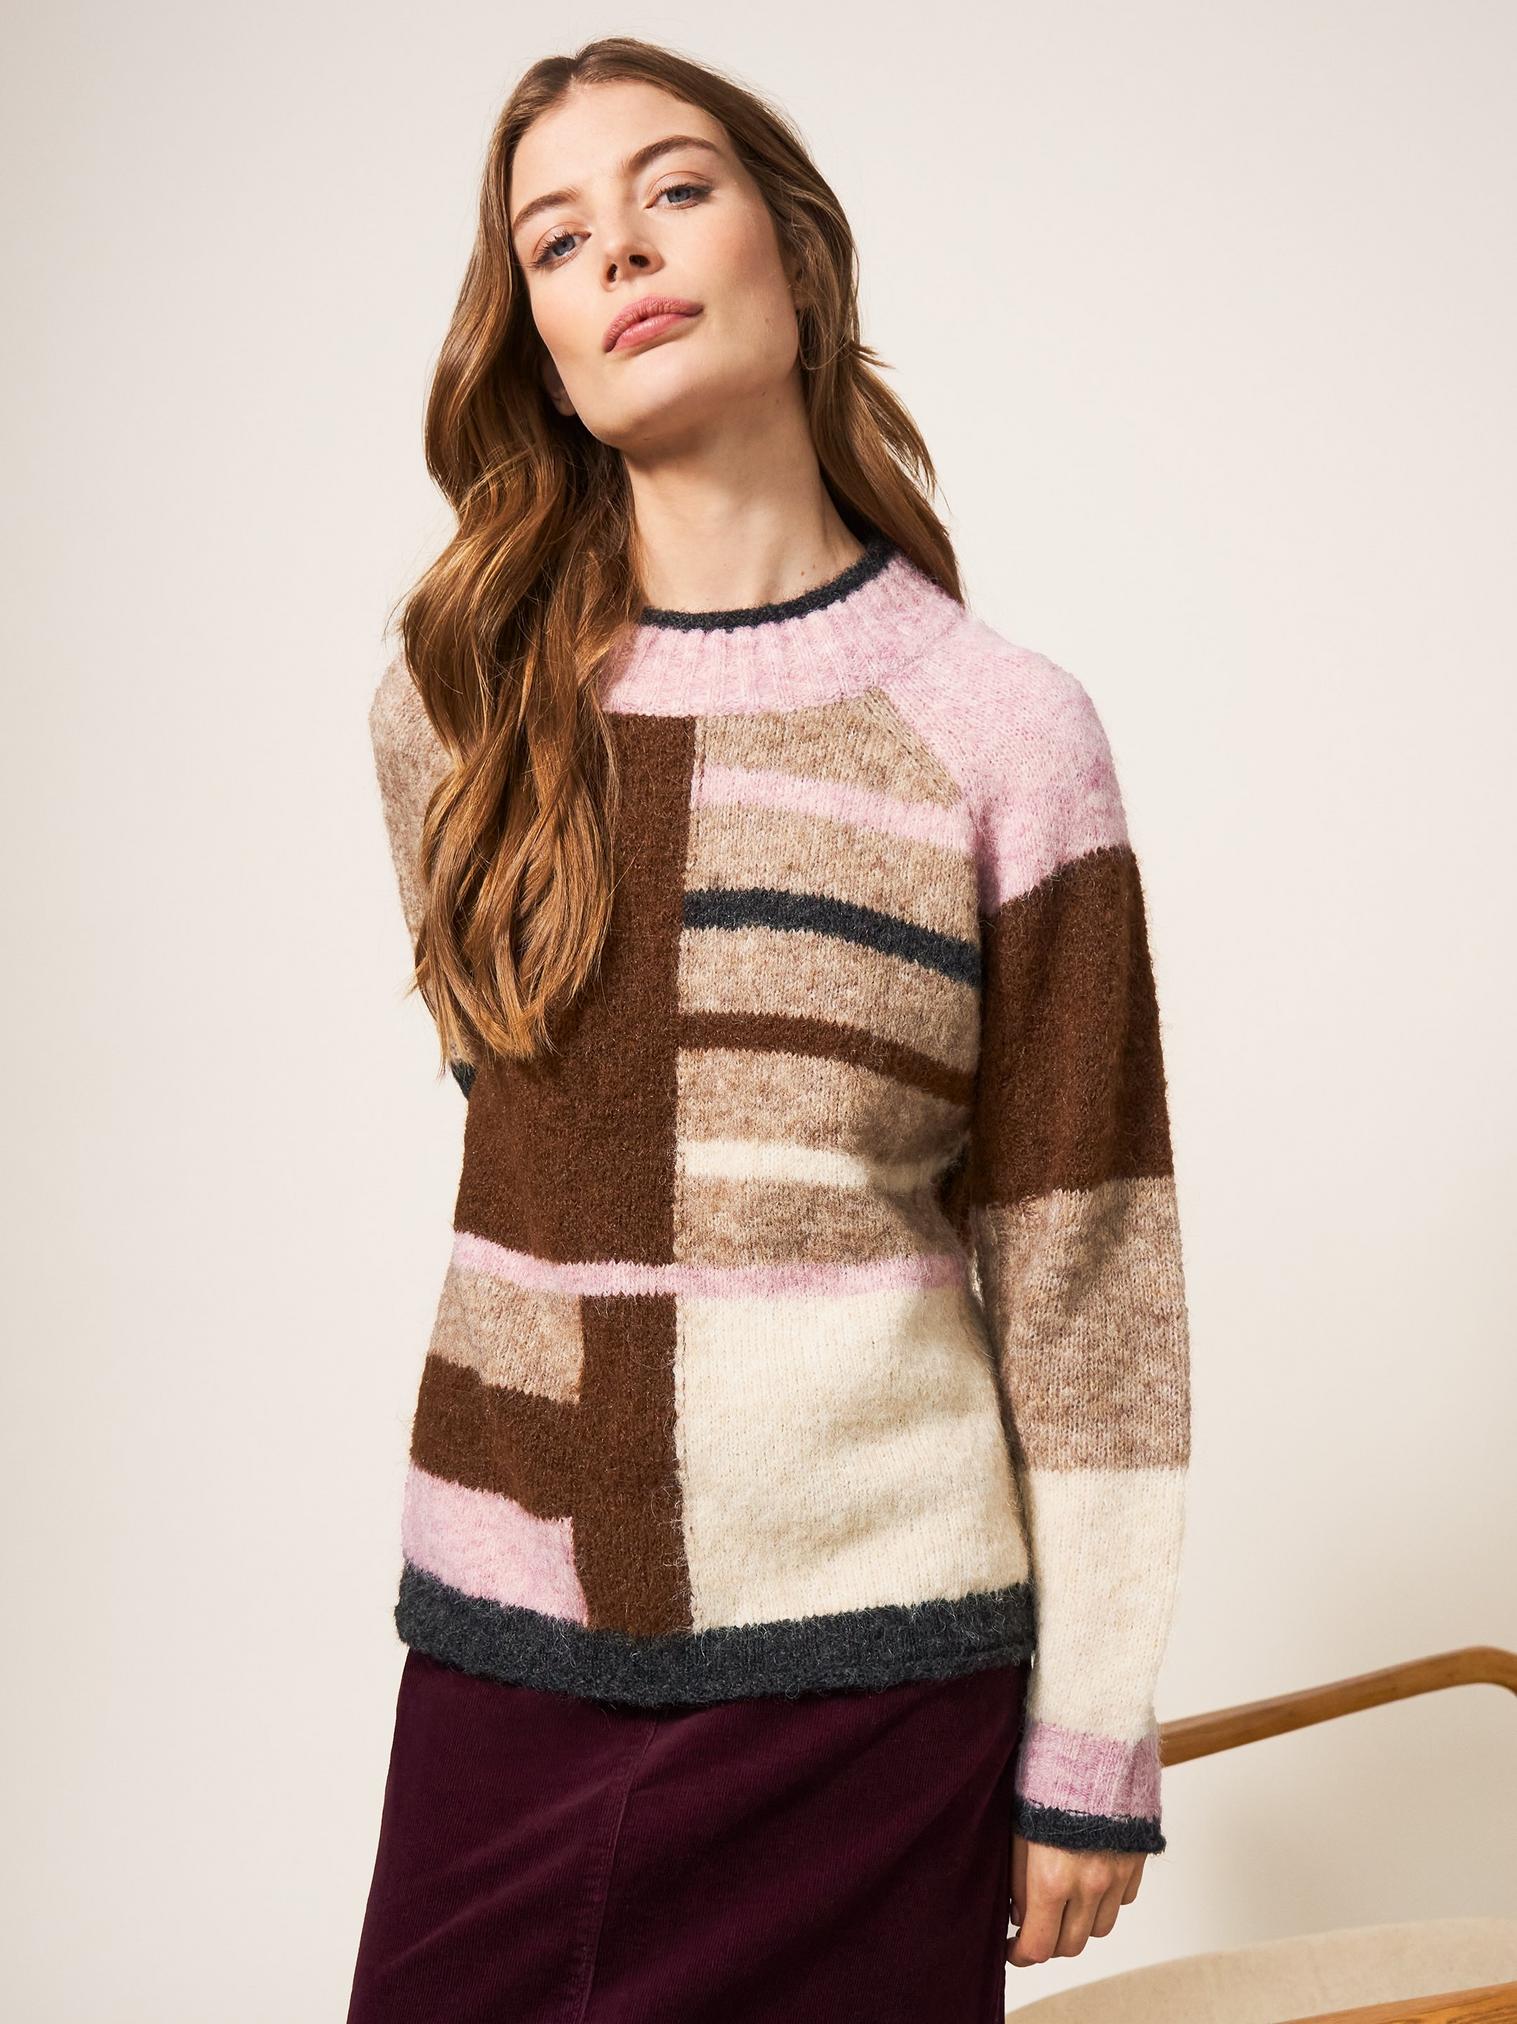 MEDWAY COLOURBLOCK JUMPER in NAT MLT - LIFESTYLE